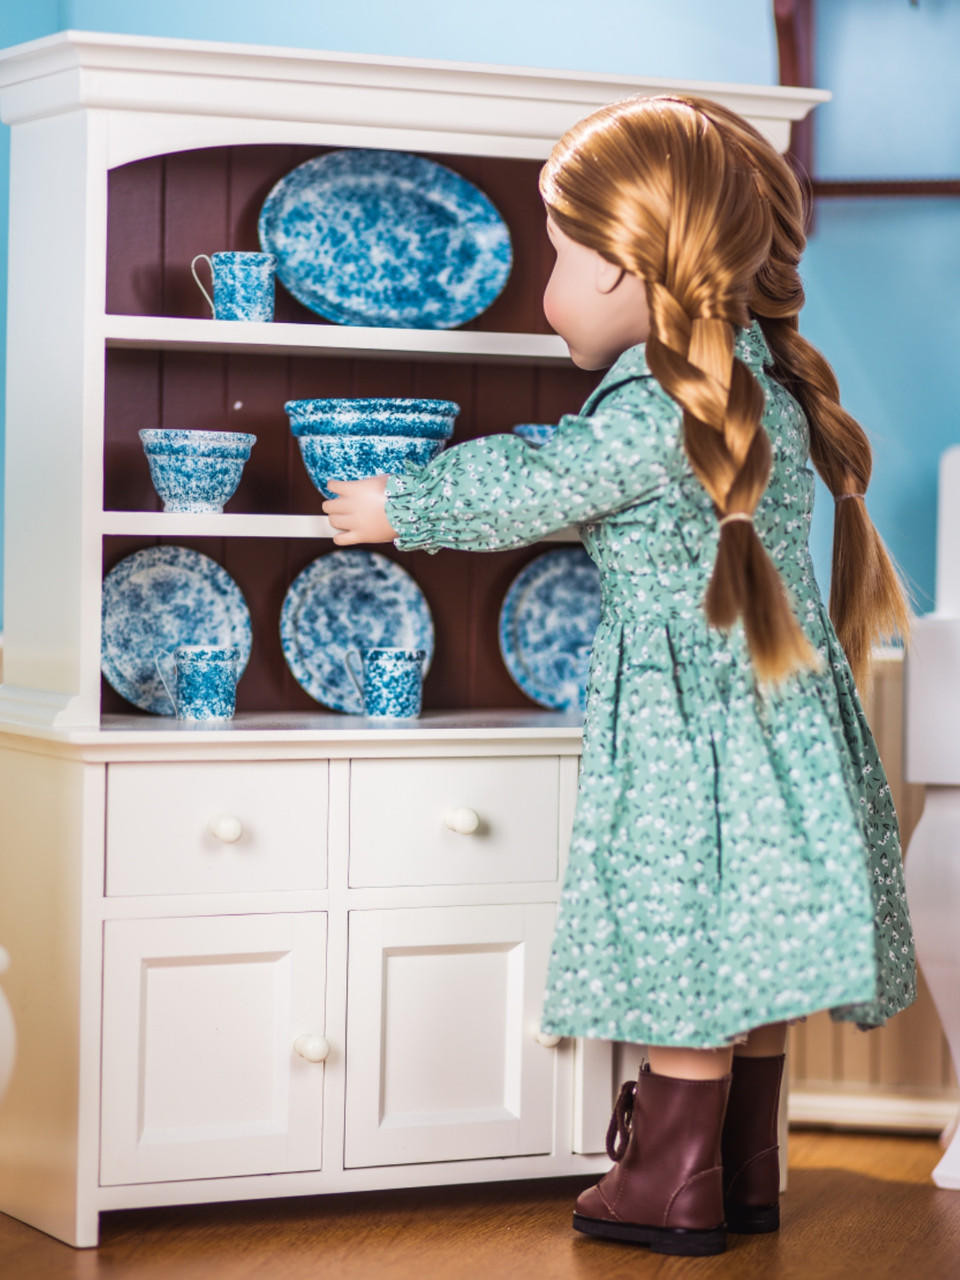 https://cdn11.bigcommerce.com/s-m5vcu70215/images/stencil/1280x1280/products/157/2184/the-queens-treasures-wooden-farmhouse-cupboard-dish-hutch-furniture-for-18-inch-dolls__72399.1692299268.jpg?c=1